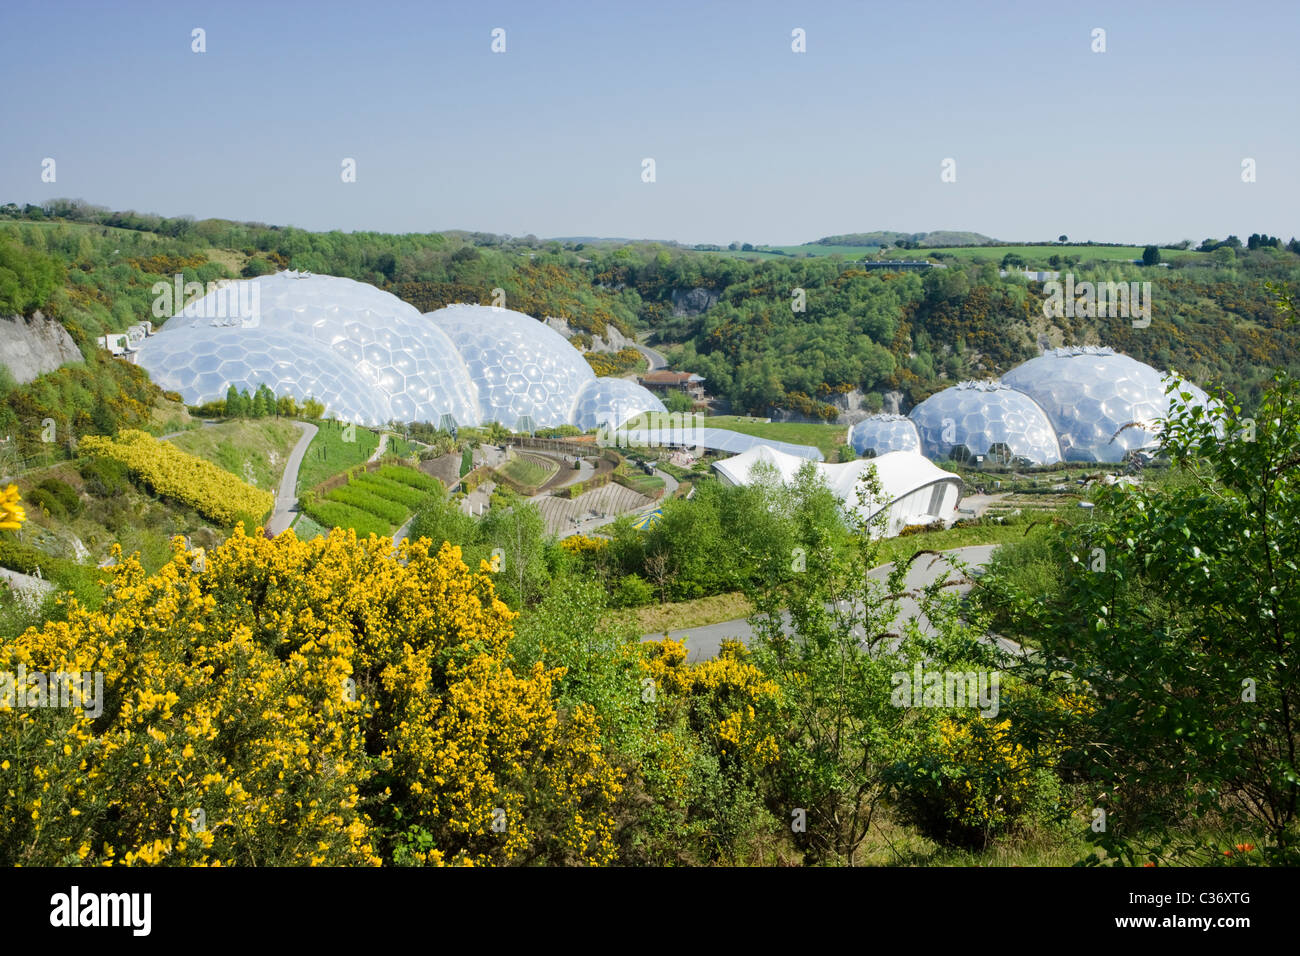 Eden Project, St Austell, Cornwall, UK Banque D'Images